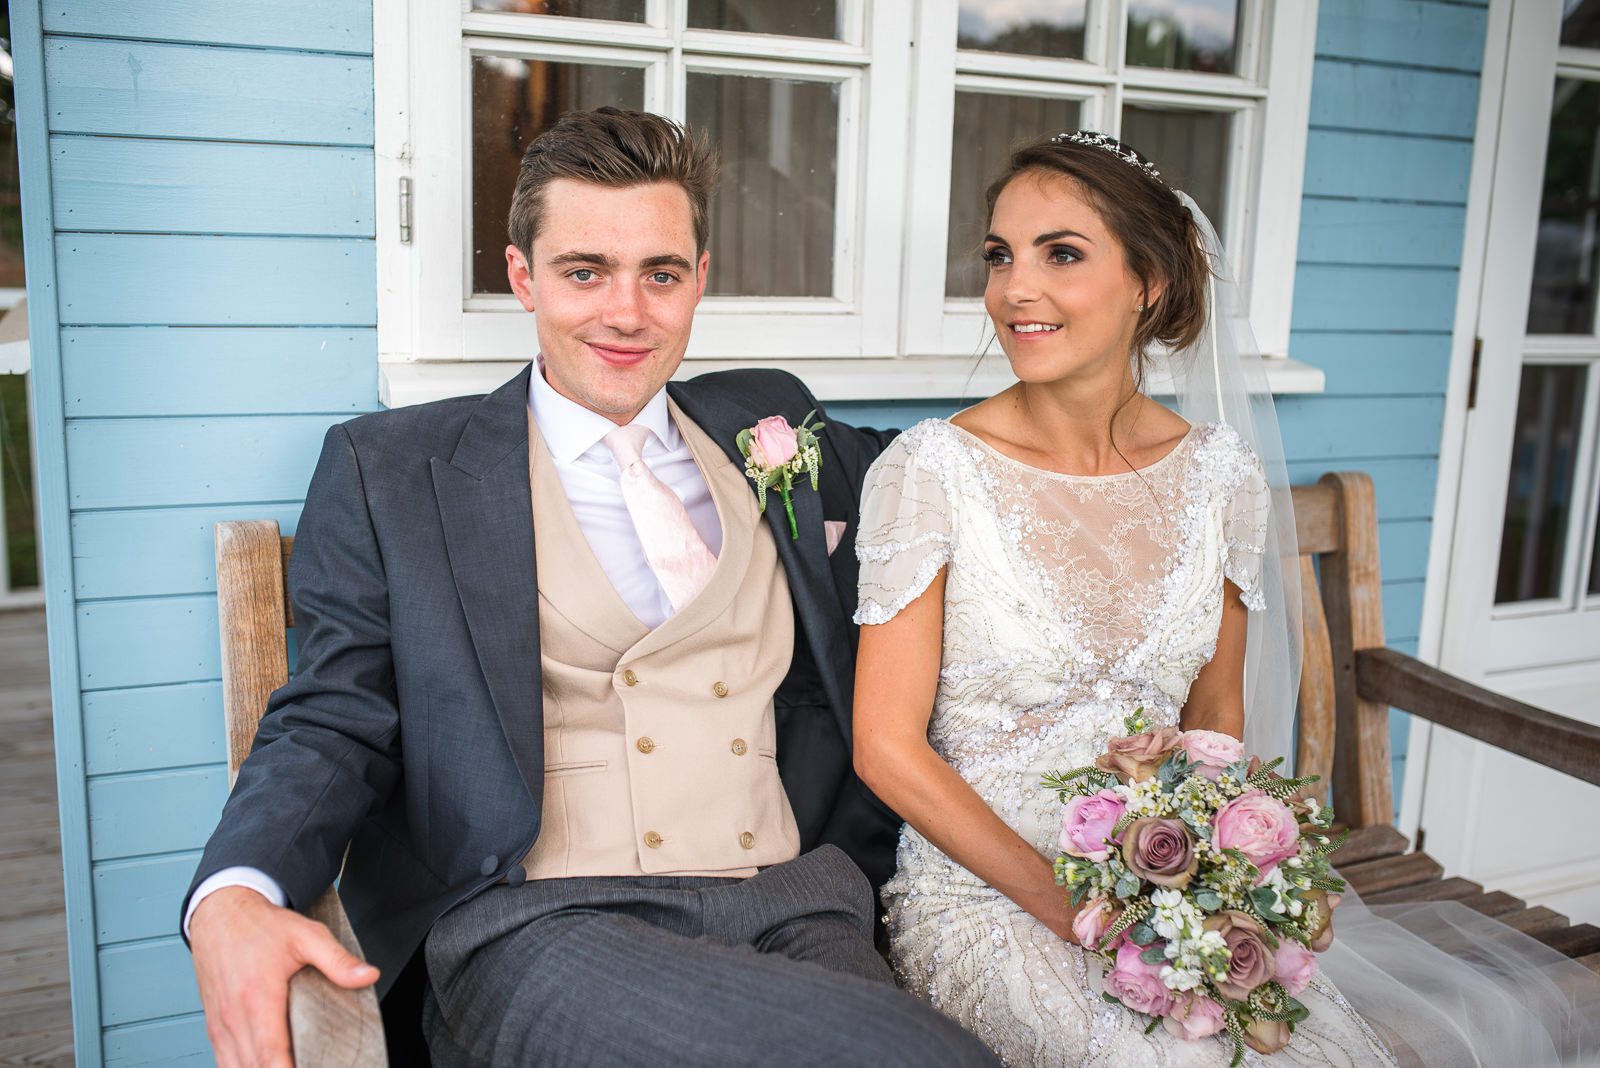 Stylish and beautiful bride and groom photo of the couple sat on a bench in the grounds of the family home.